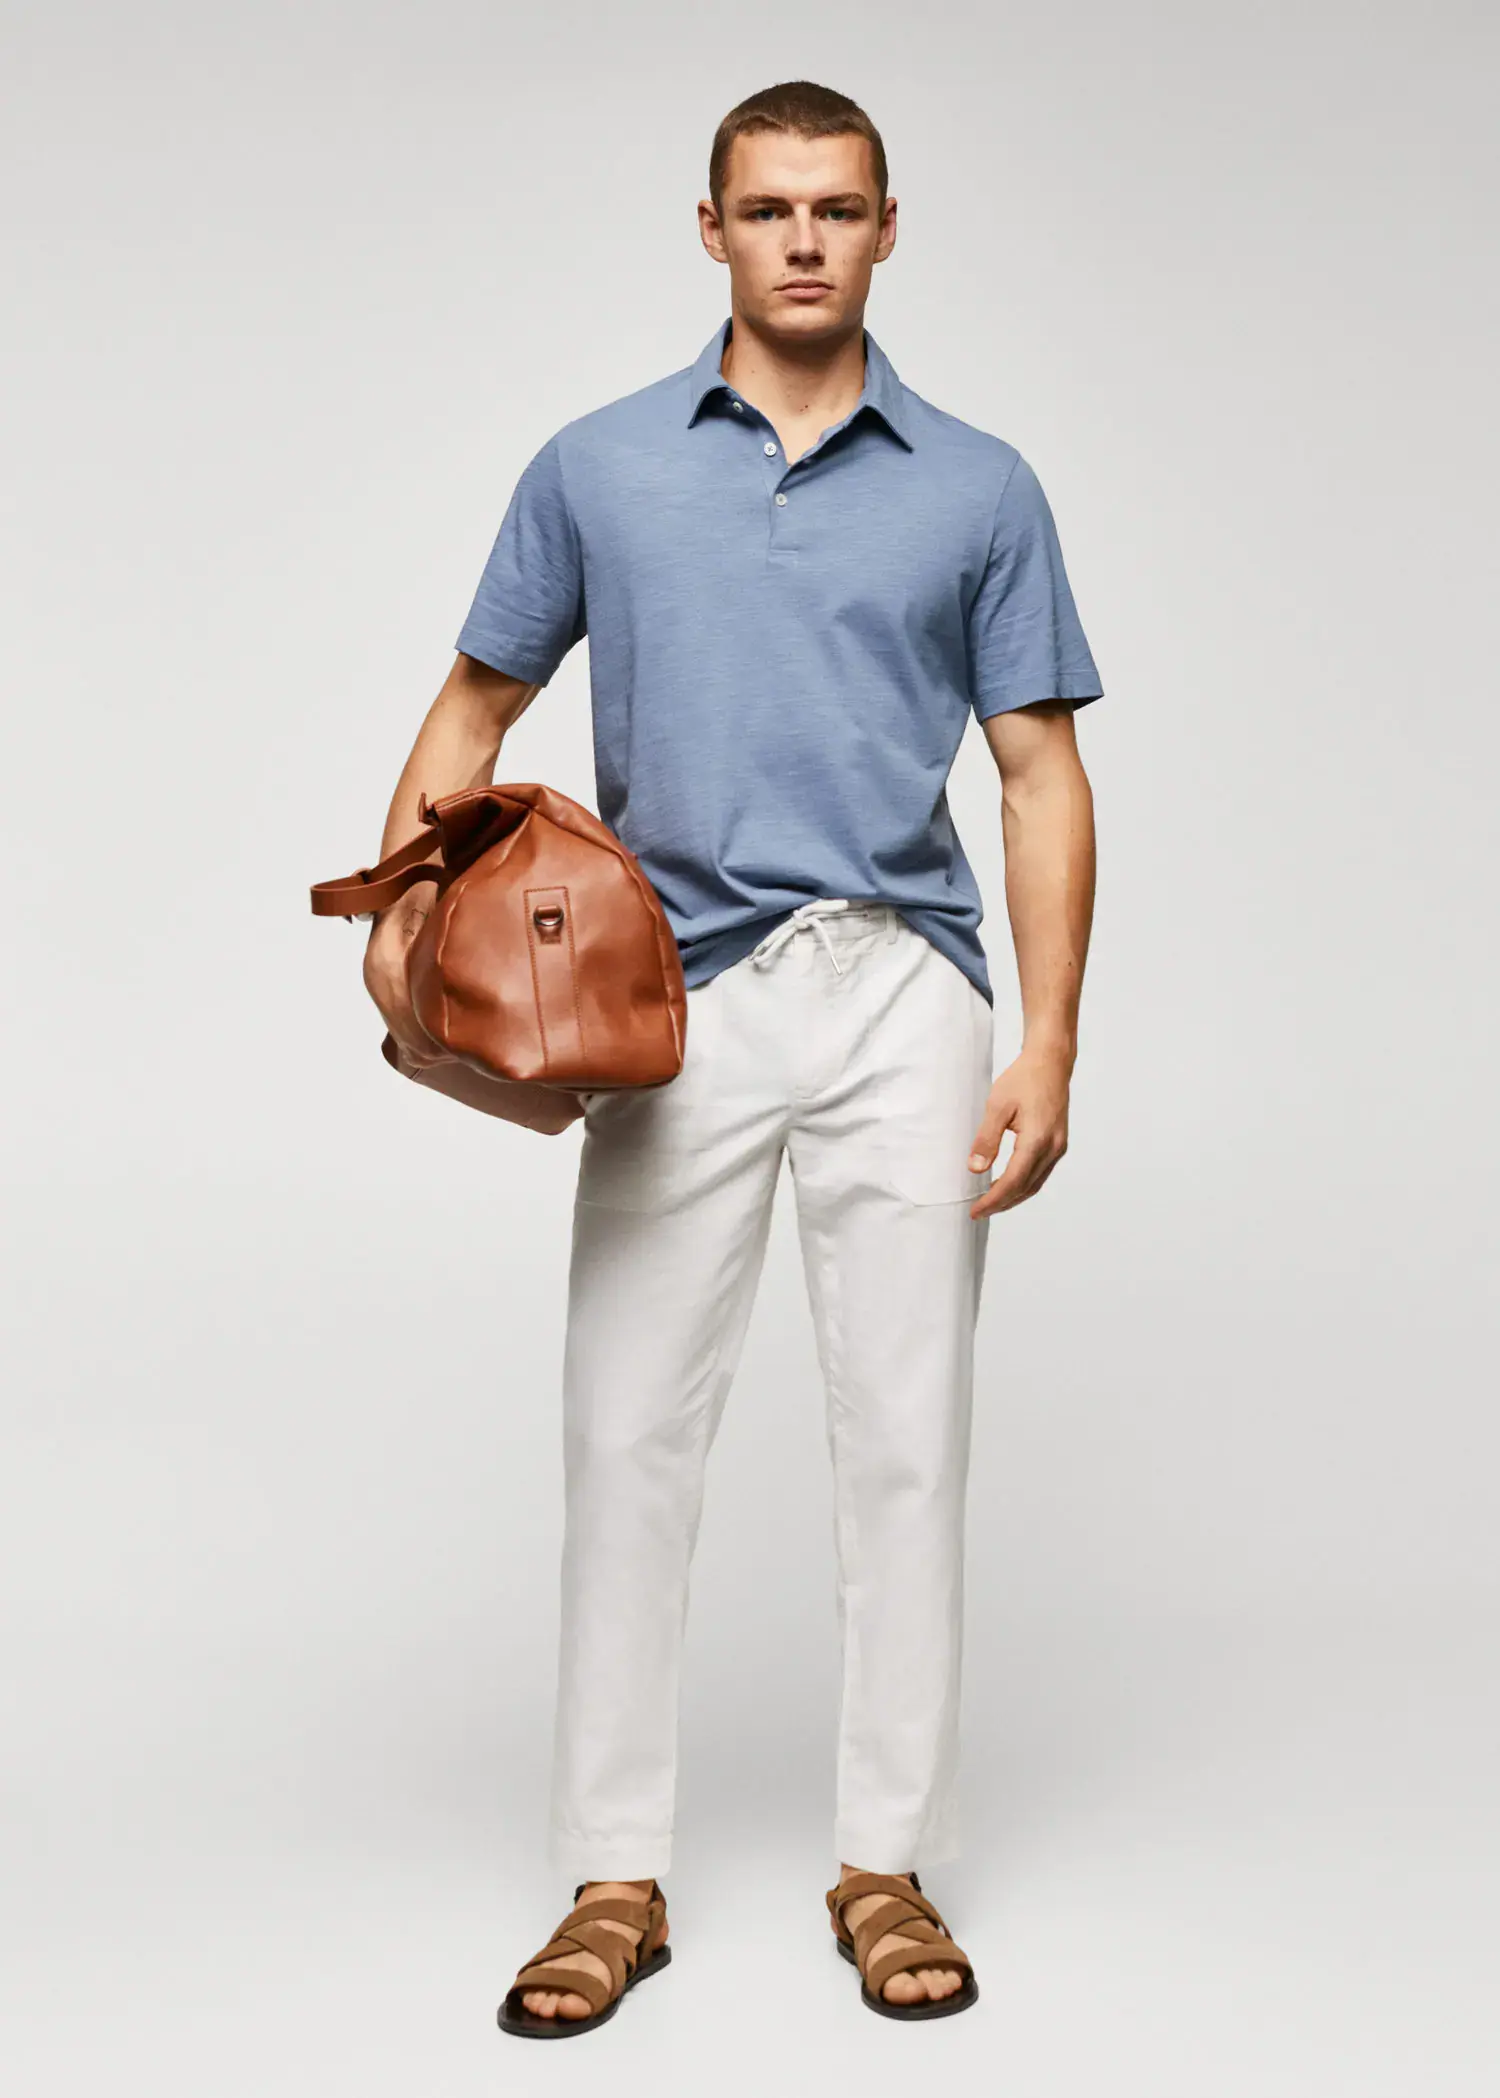 Mango 100% cotton basic polo shirt . a man holding a brown bag in front of a white wall. 